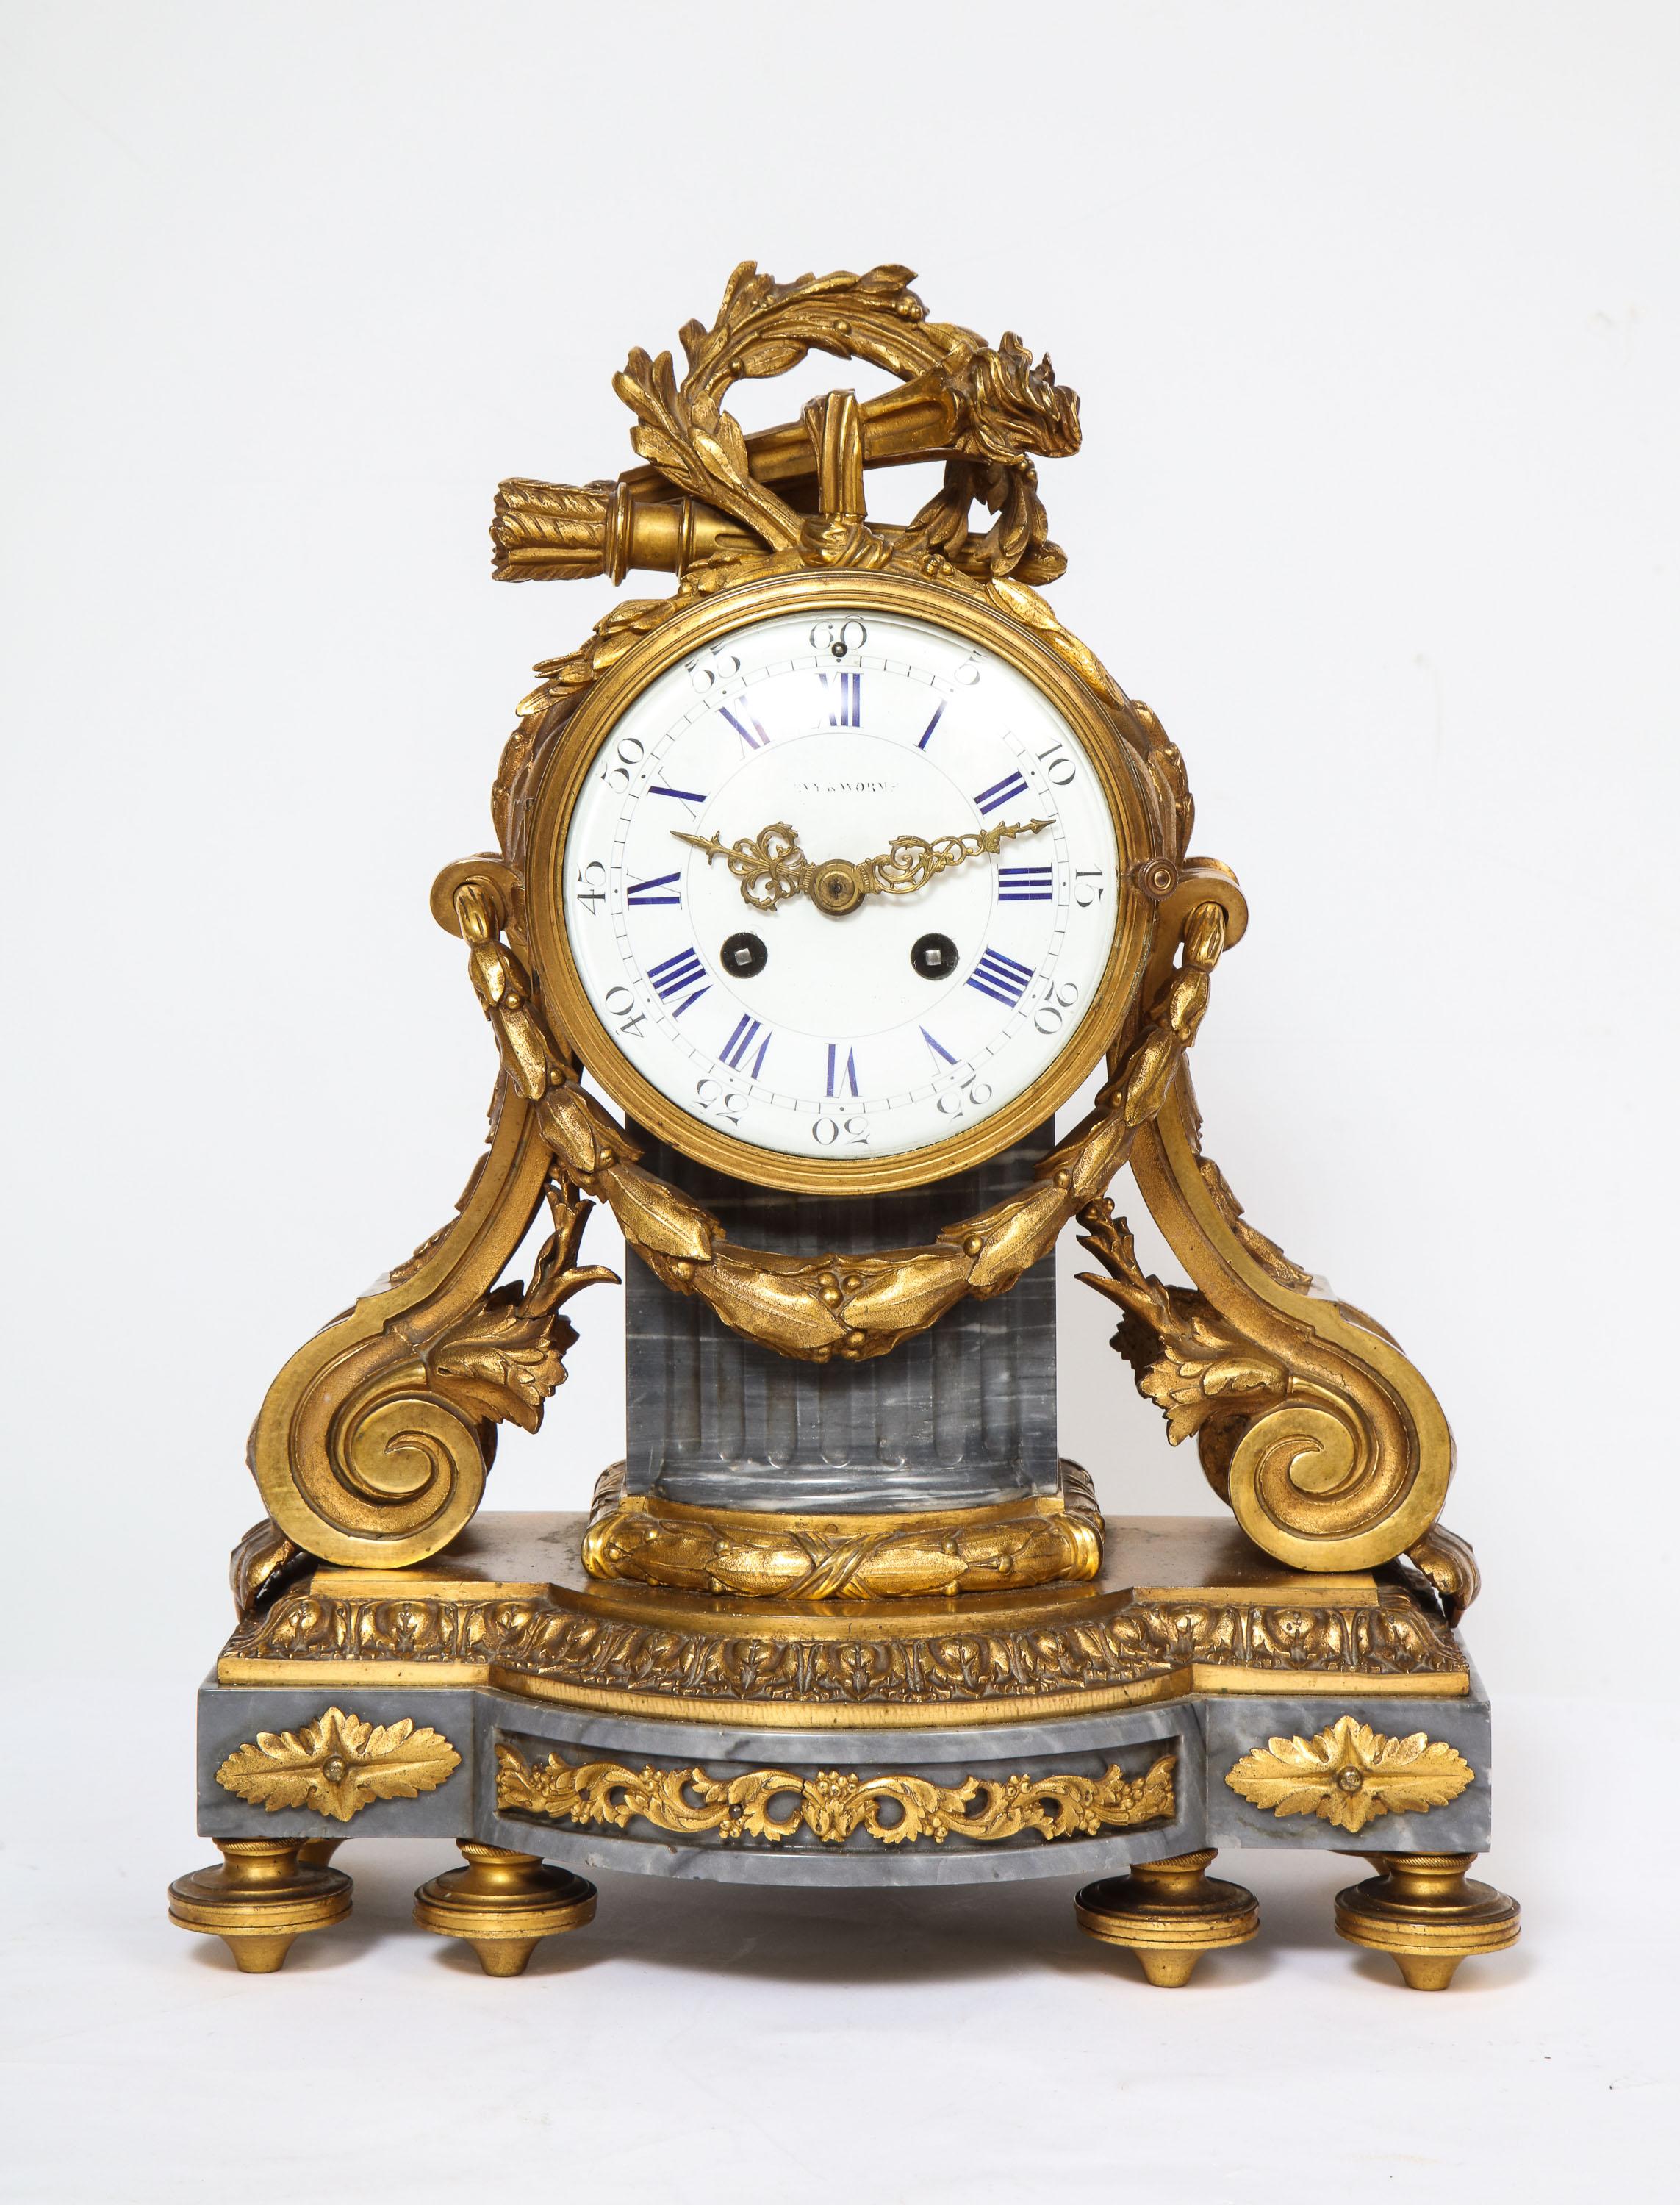 A French ormolu-mounted Bleu Turquin marble clock, Japy Freres, circa 1880

Very nice quality bronze / ormolu mounts. 

Movement Marked 